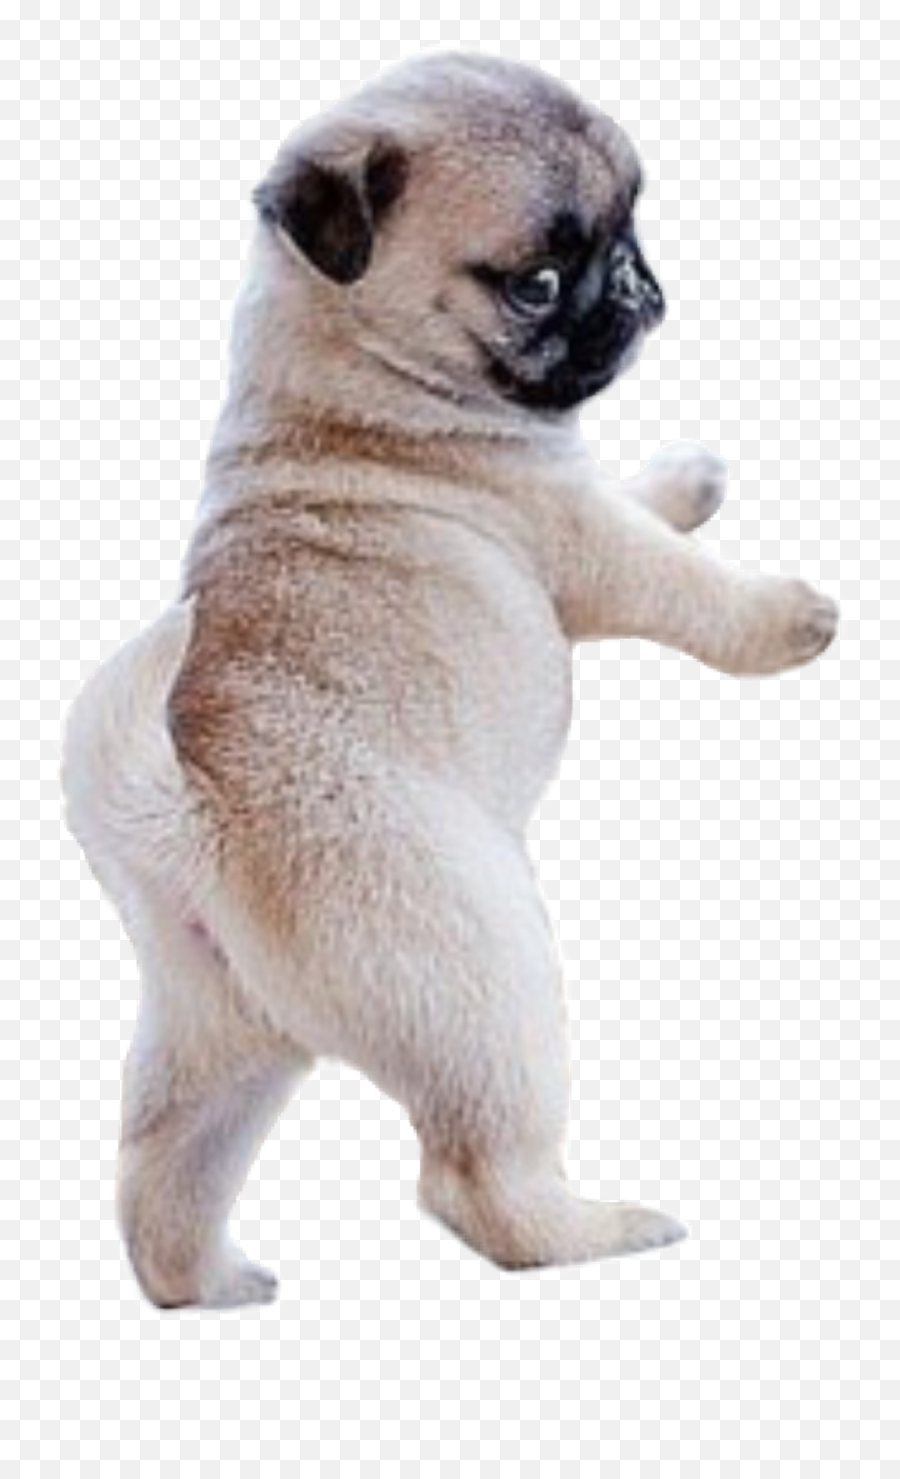 Dog Png - Cachorro Tiernos Perros Pug Hd Png Download Cute Baby Pugs,Pug Png